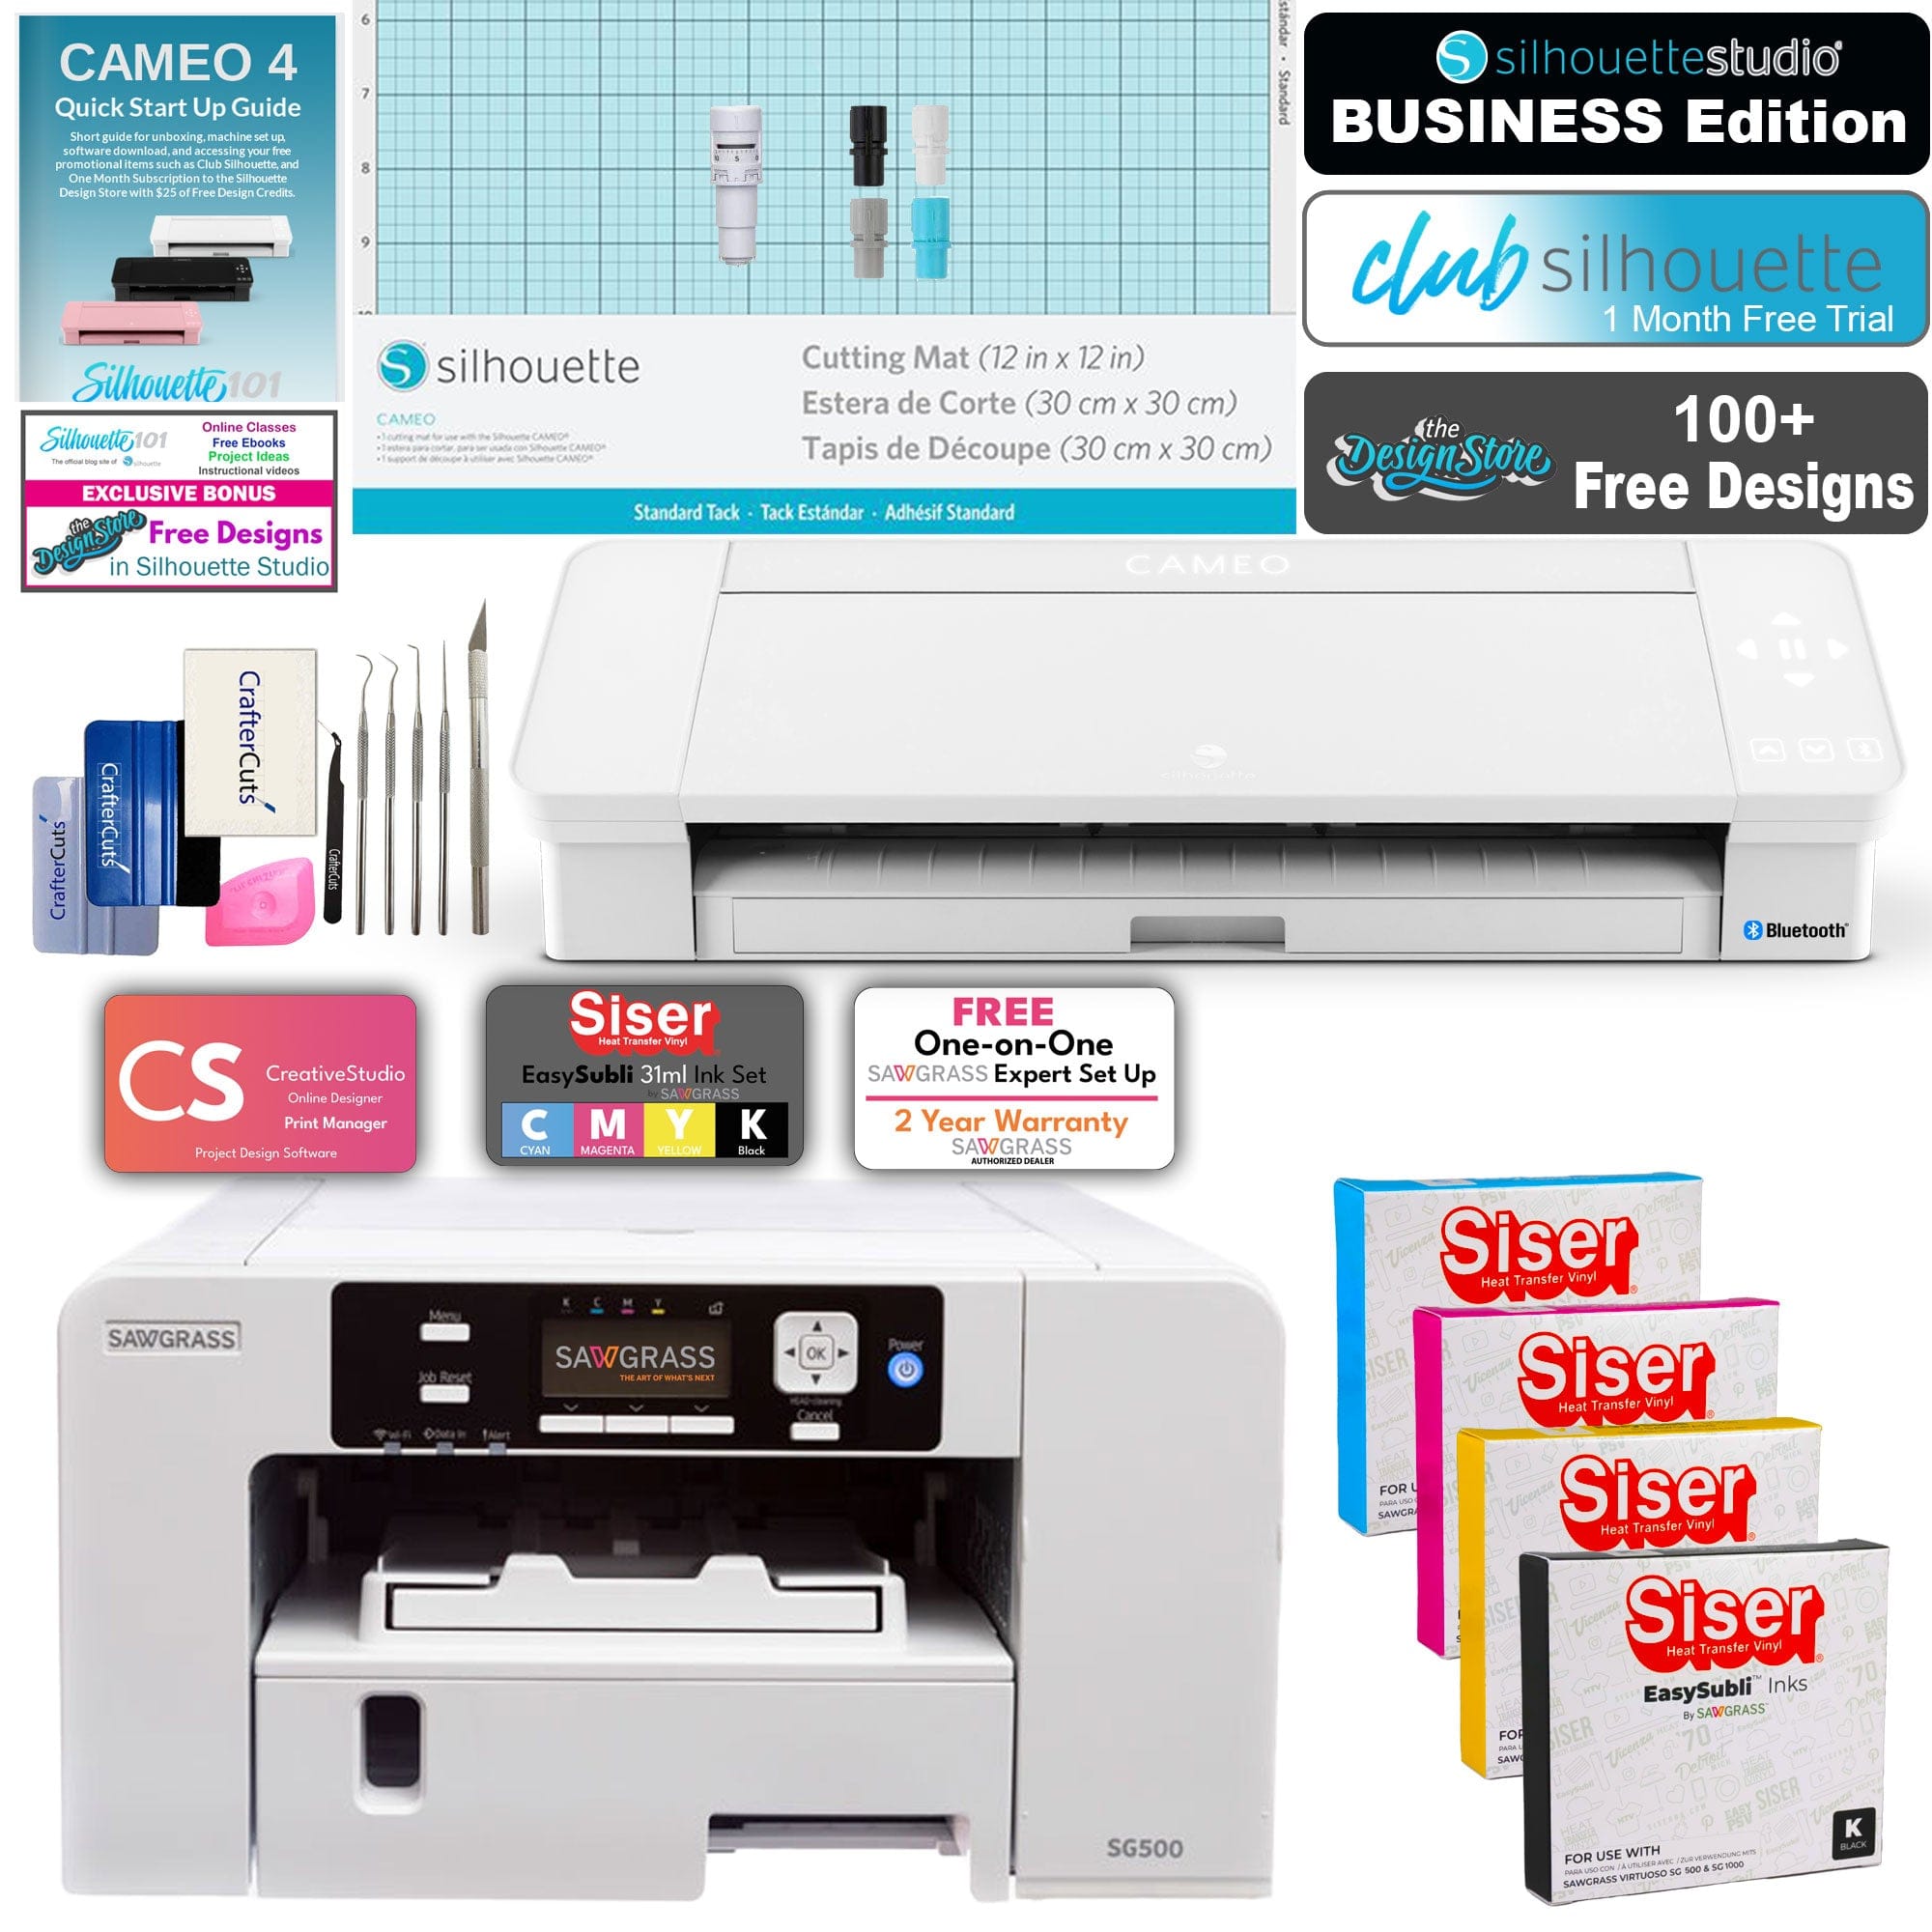 Sawgrass Sawgrass SG500 Siser EasySubli INK Starter Bundle Silhouette Cameo 4 with Business Edition Software